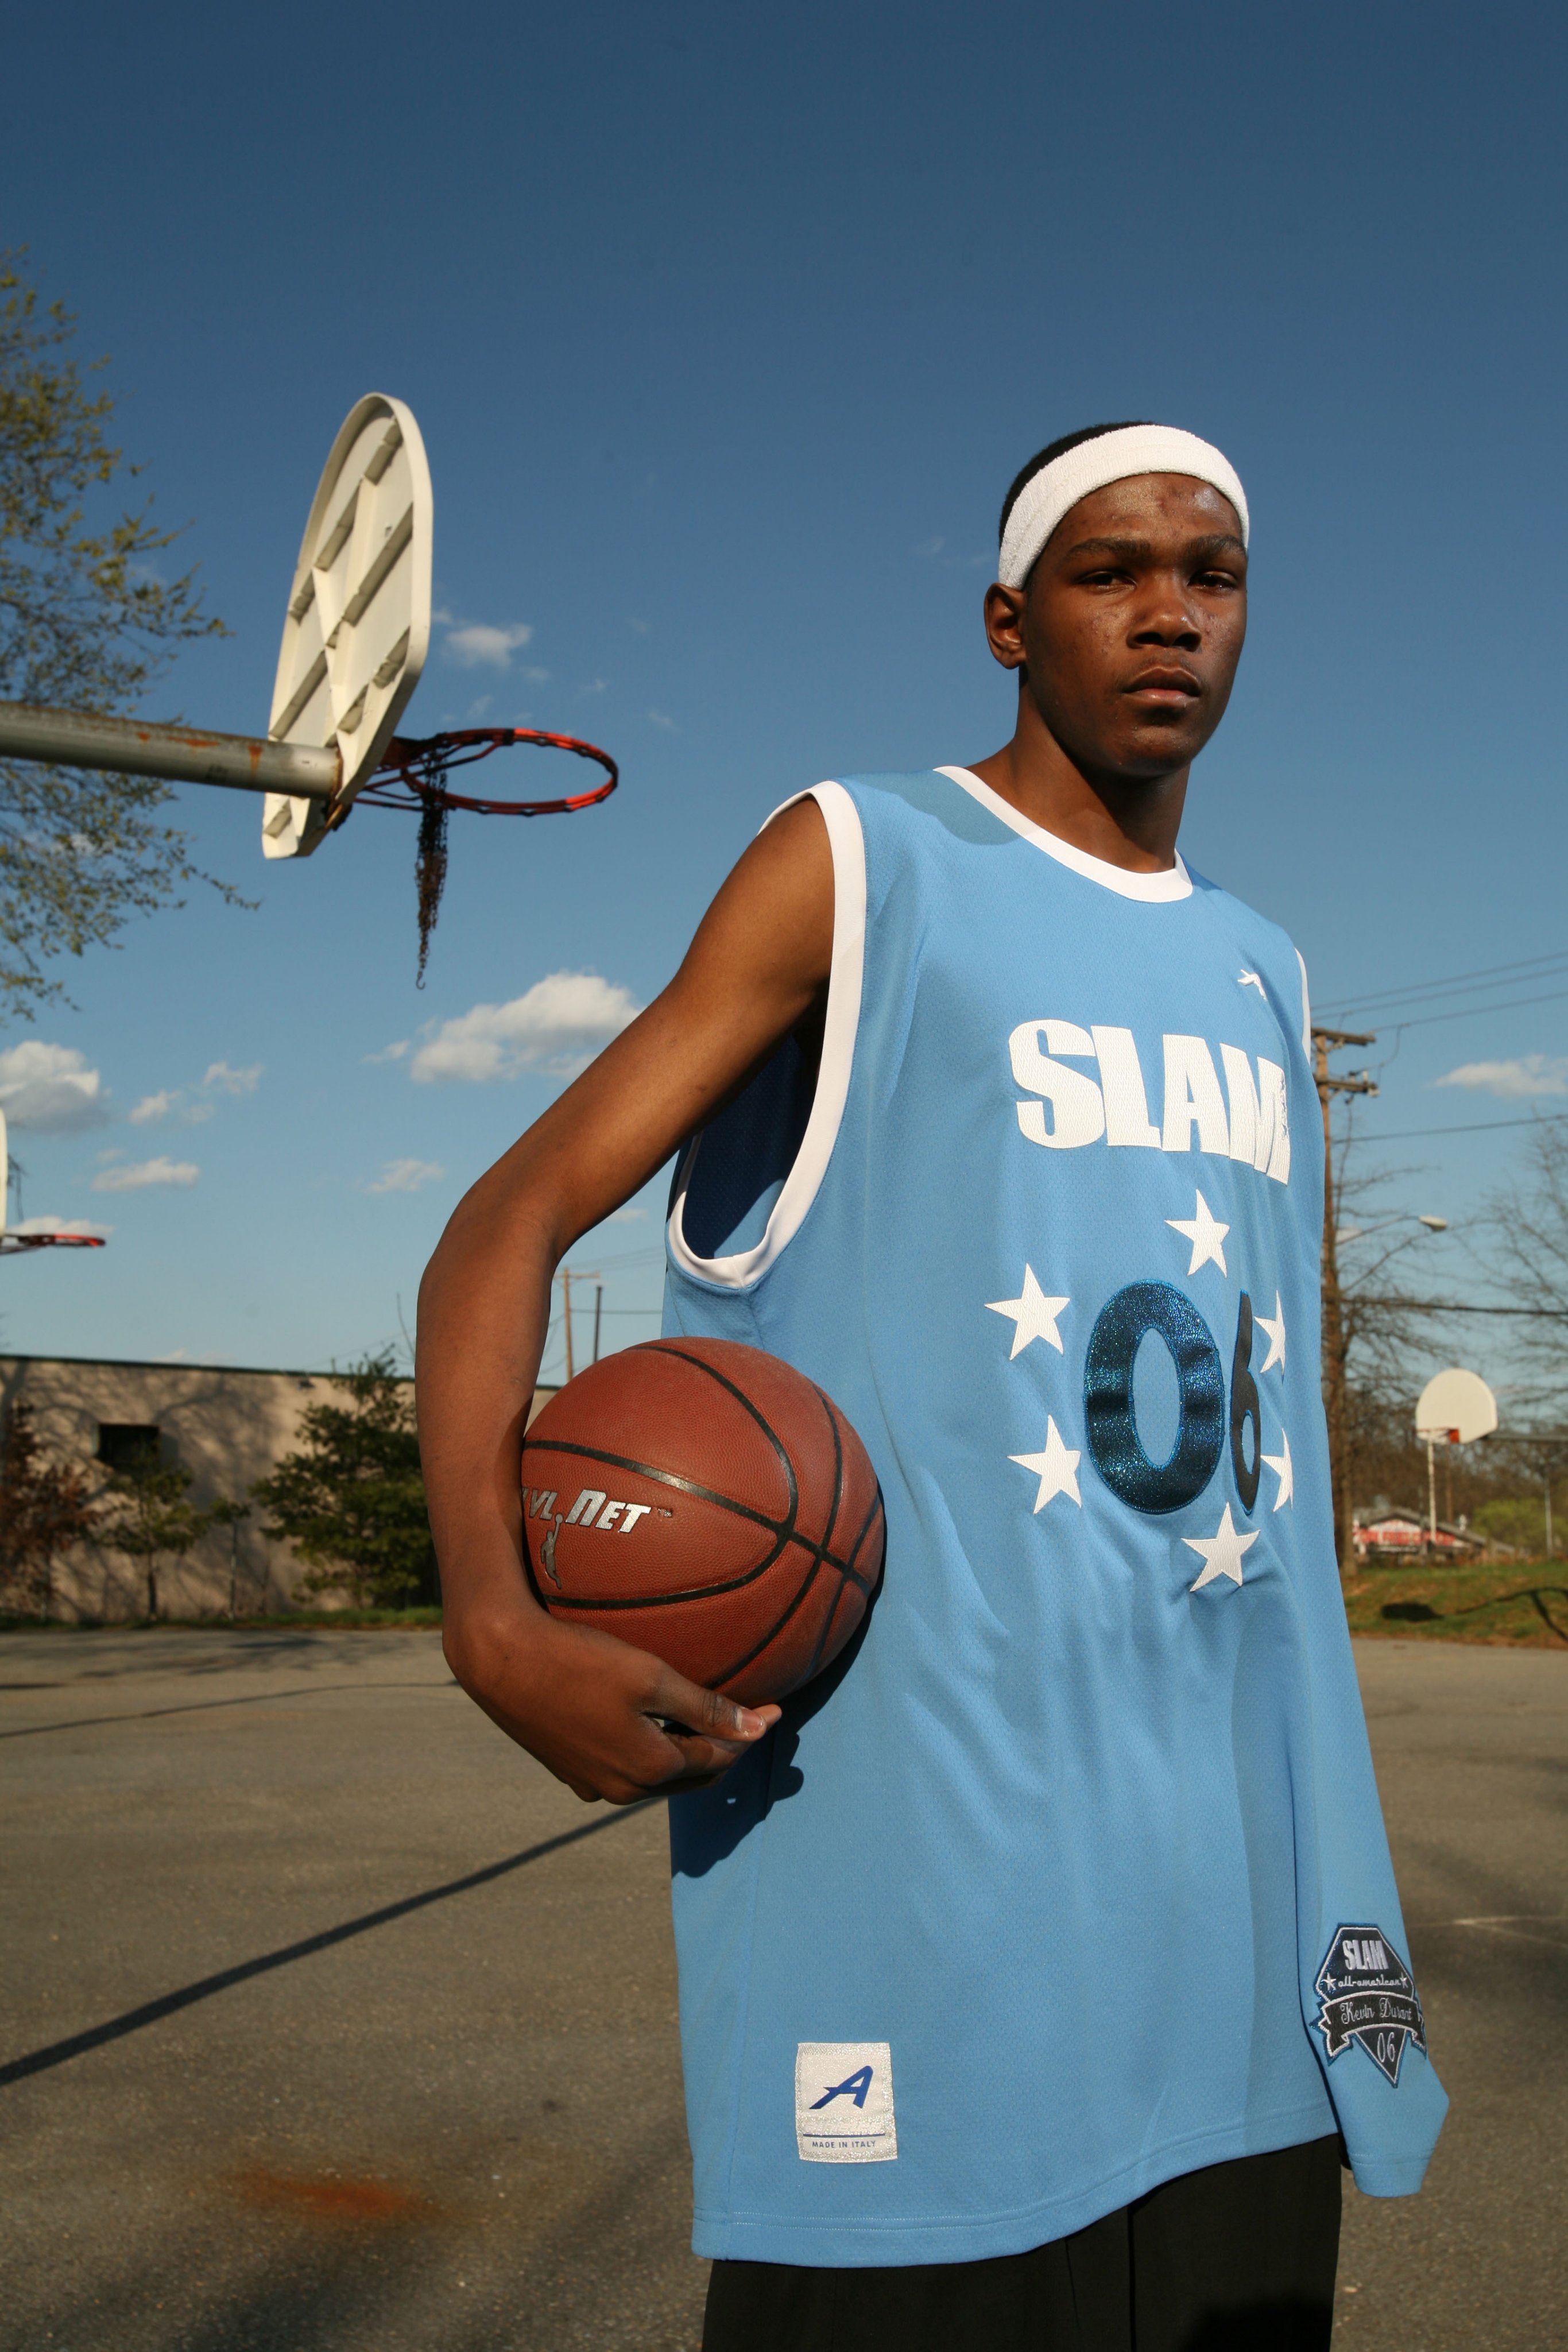 kevin durant as a kid